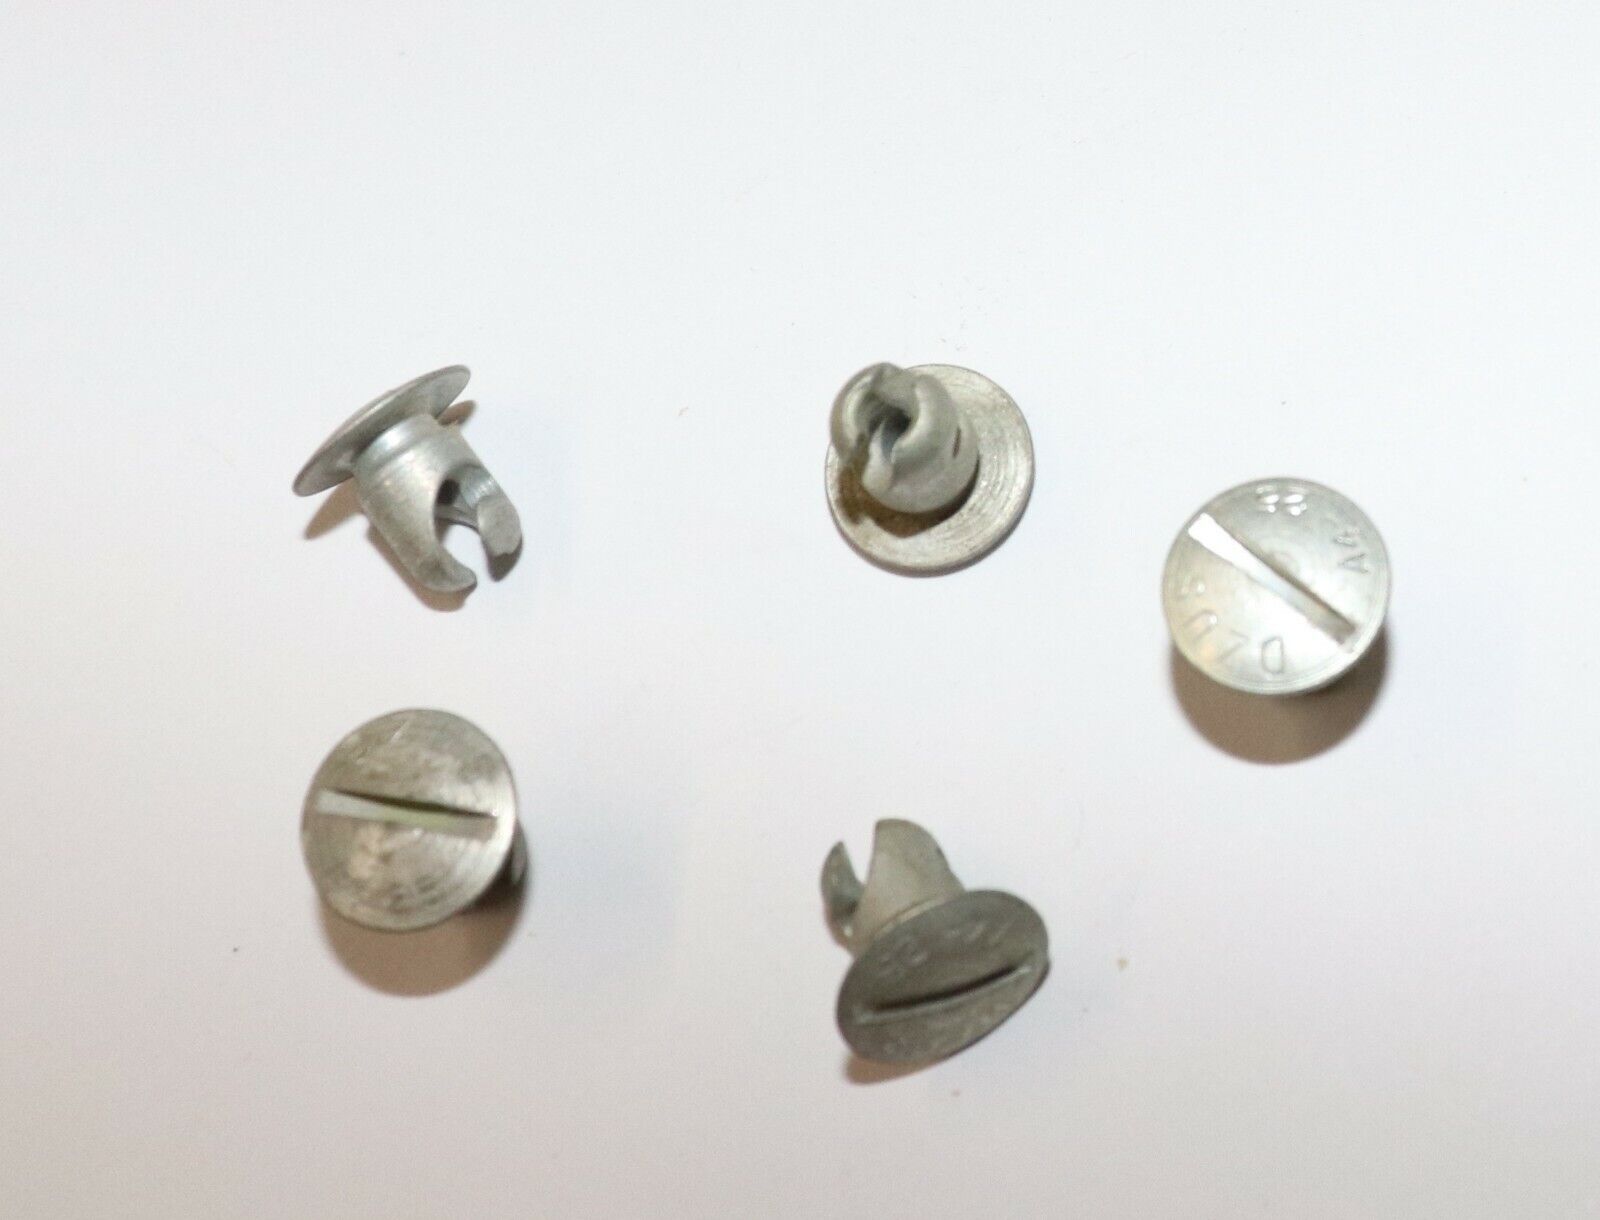 5 New A4-25 Oval Head Stud Short DZUS Fasteners - Get 5 for $3.95